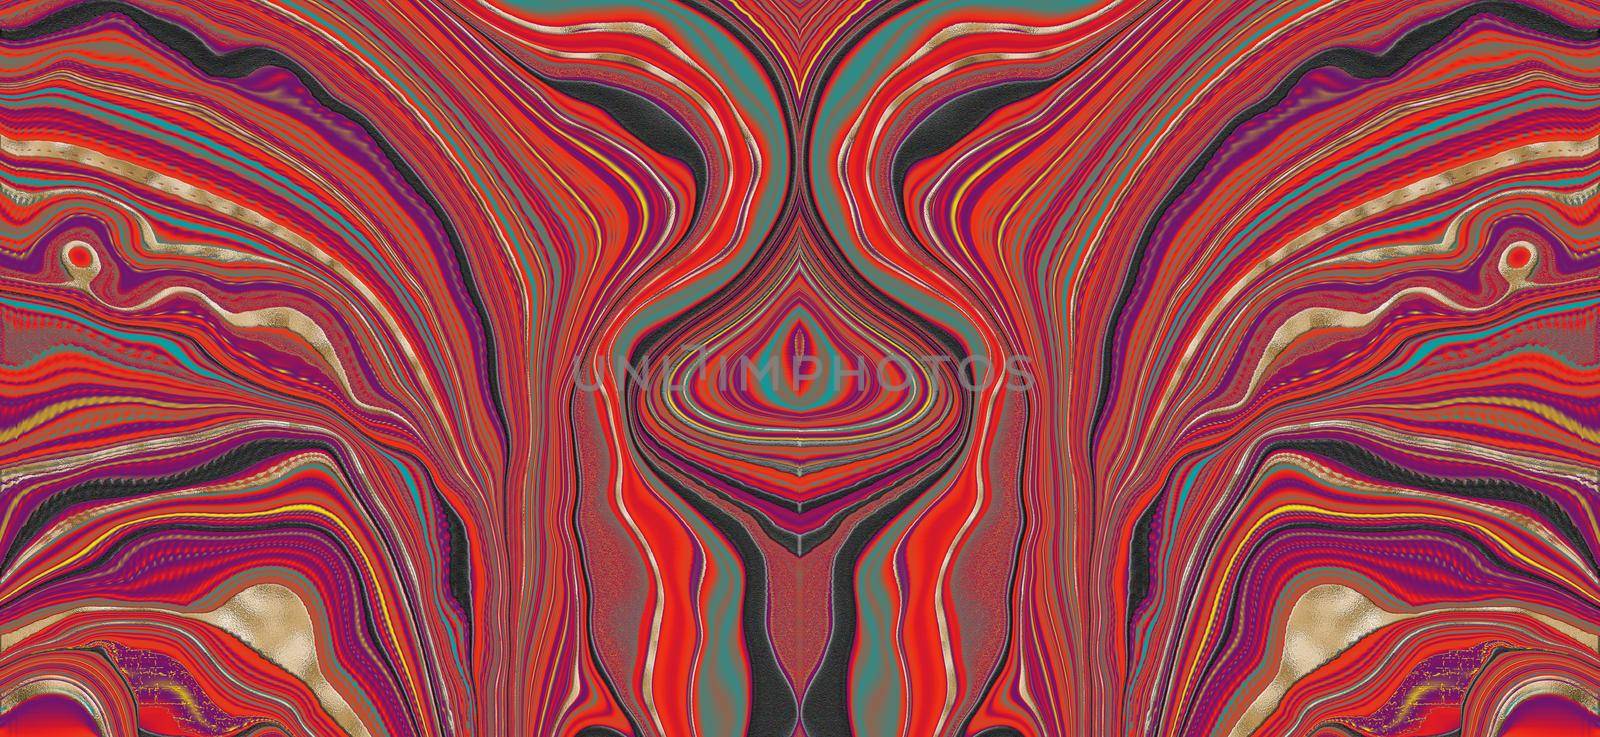 Red colourful textured background. Abstract pattern, marbling agate texture and shiny gold curves background. Fluid futuristic effect. illustration